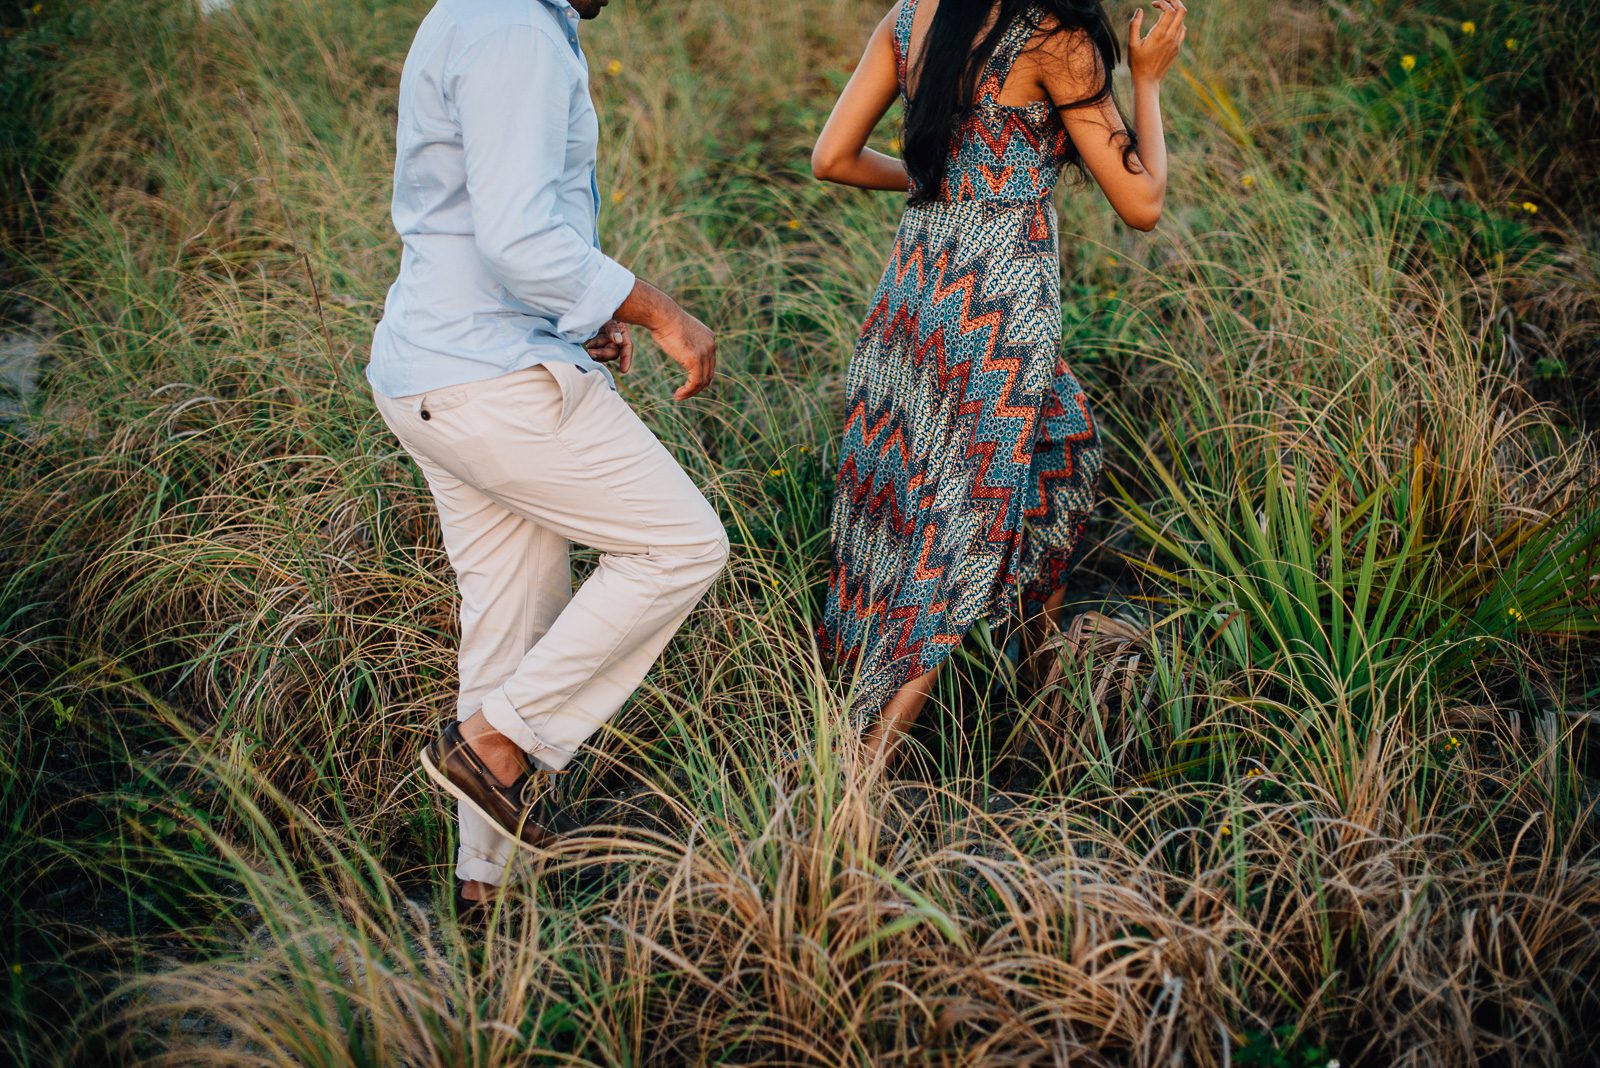 evan rich photography miami lighthouse engagement photography (11)